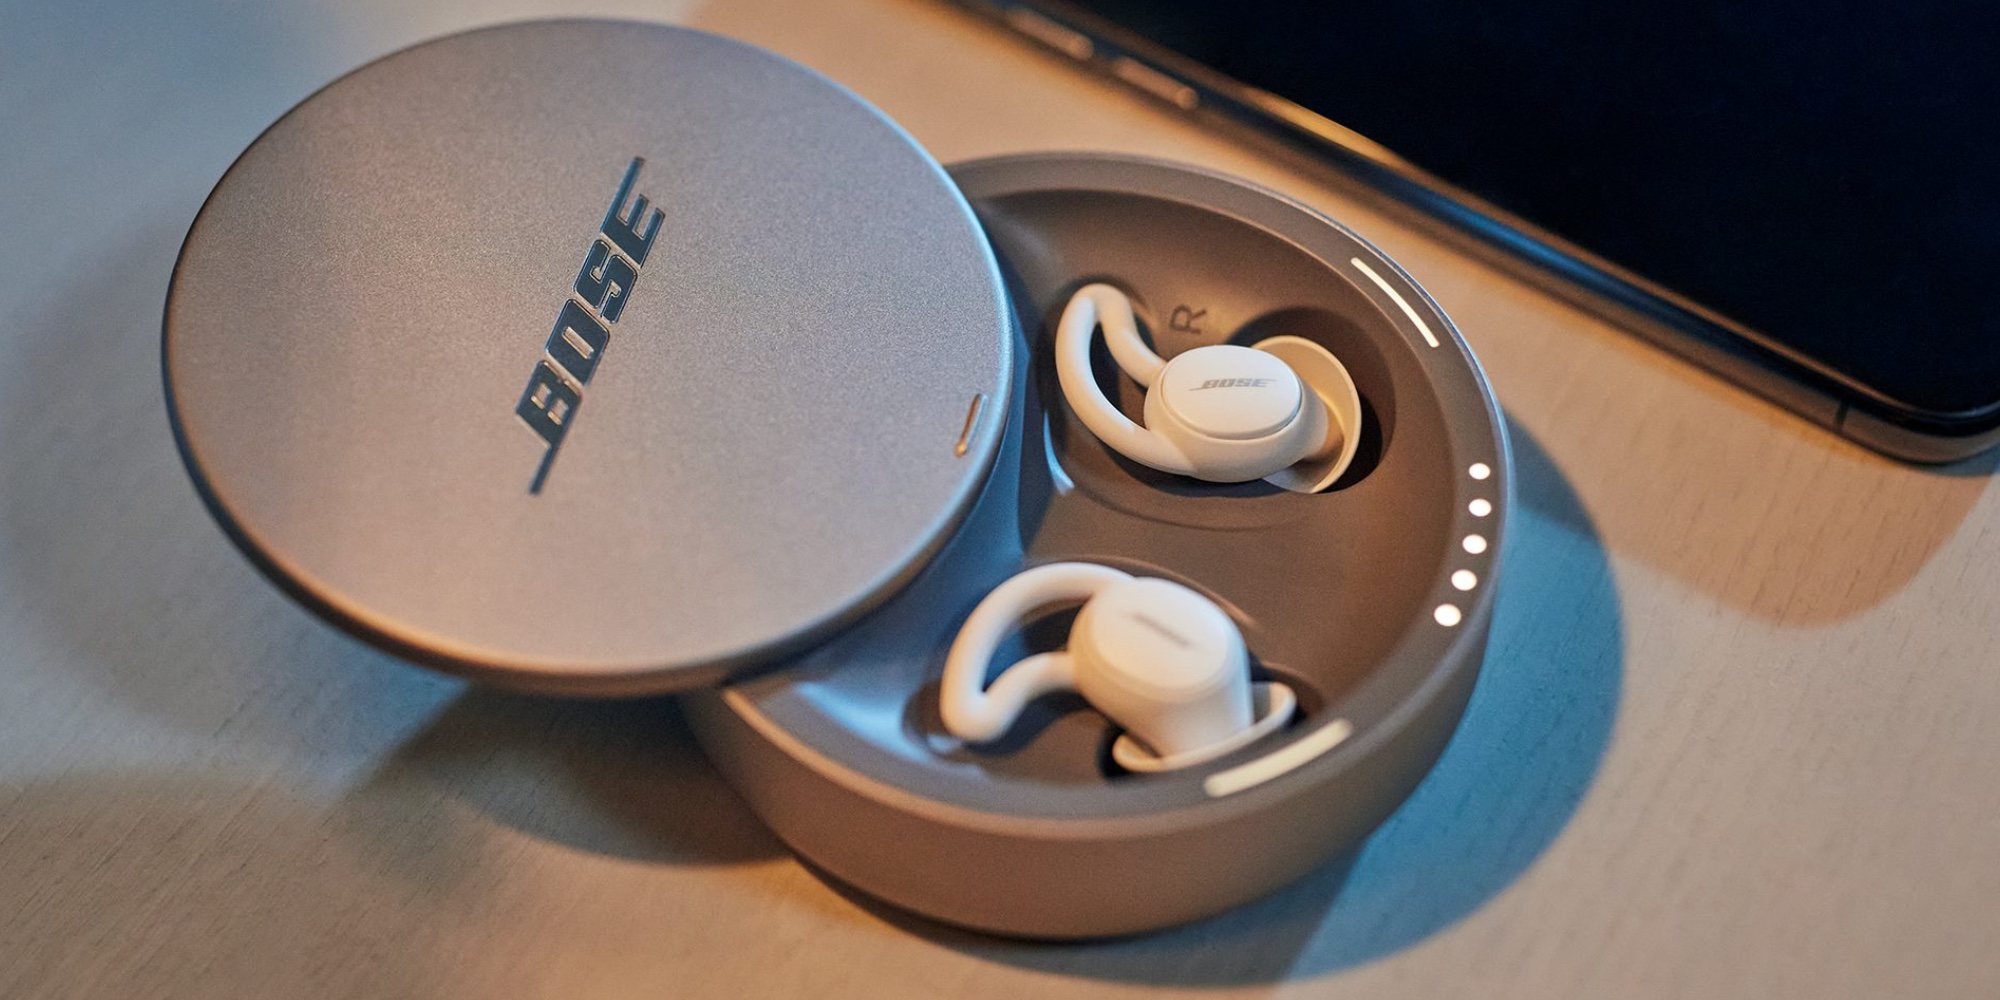 Bose's regularly $249 Sleepbuds II hit one of the best prices ever at 